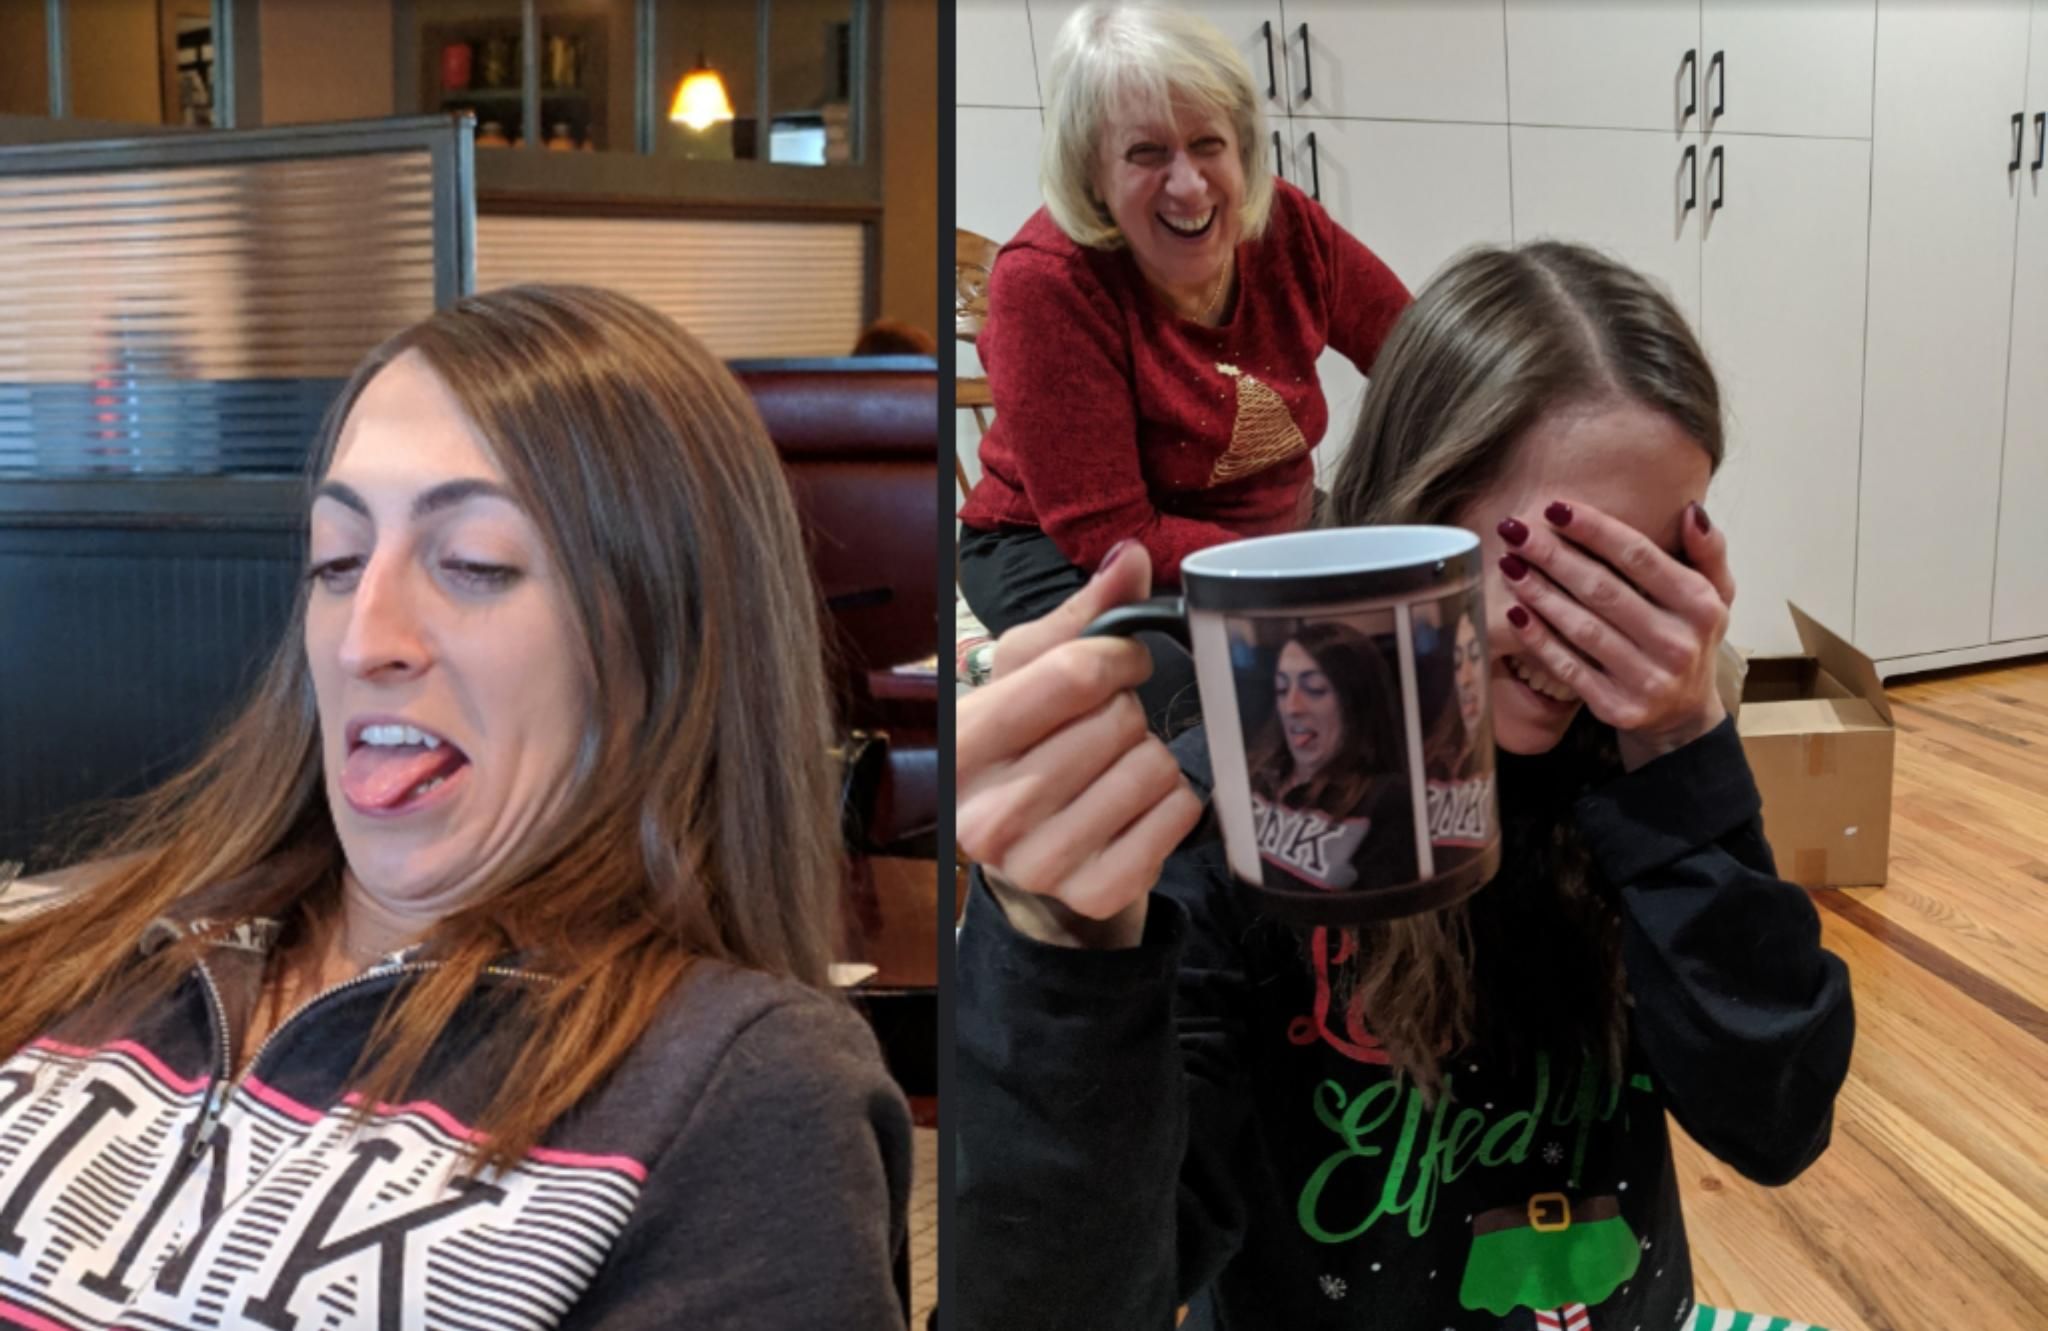 My sister learned a valuable lesson this Christmas: If you let your older brother take an ugly picture of you, you will get it on a custom color-changing mug as a gag gift. Merry Christmas everyone!